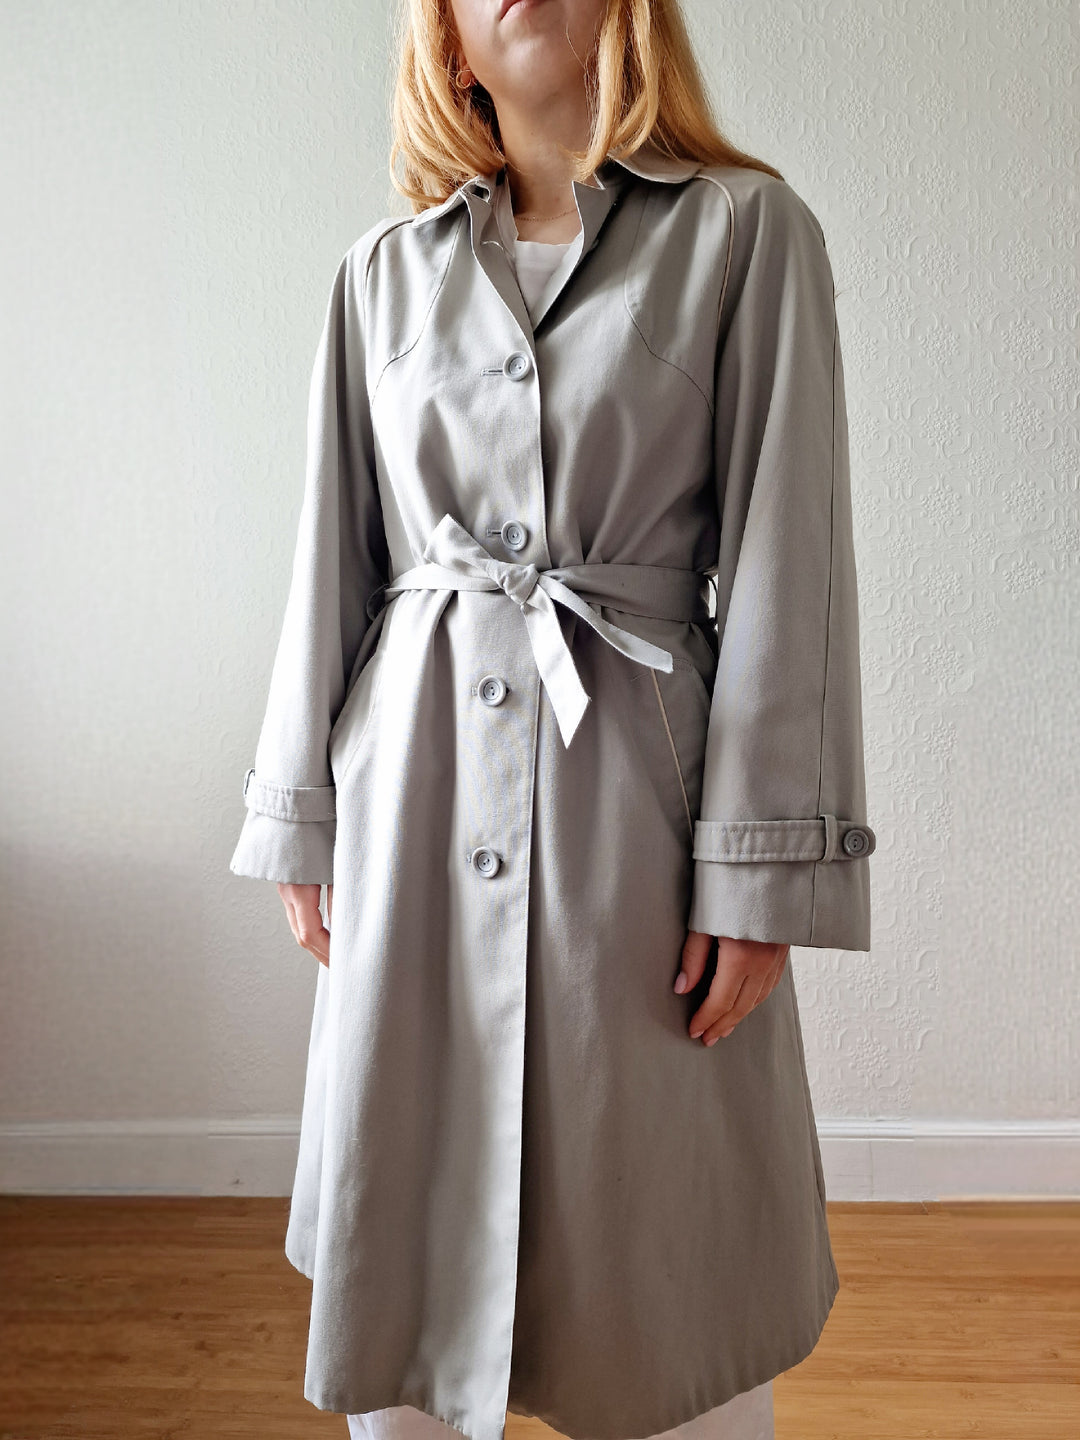 Vintage Lightweight Grey Single Breasted Trench Coat with Belt - S